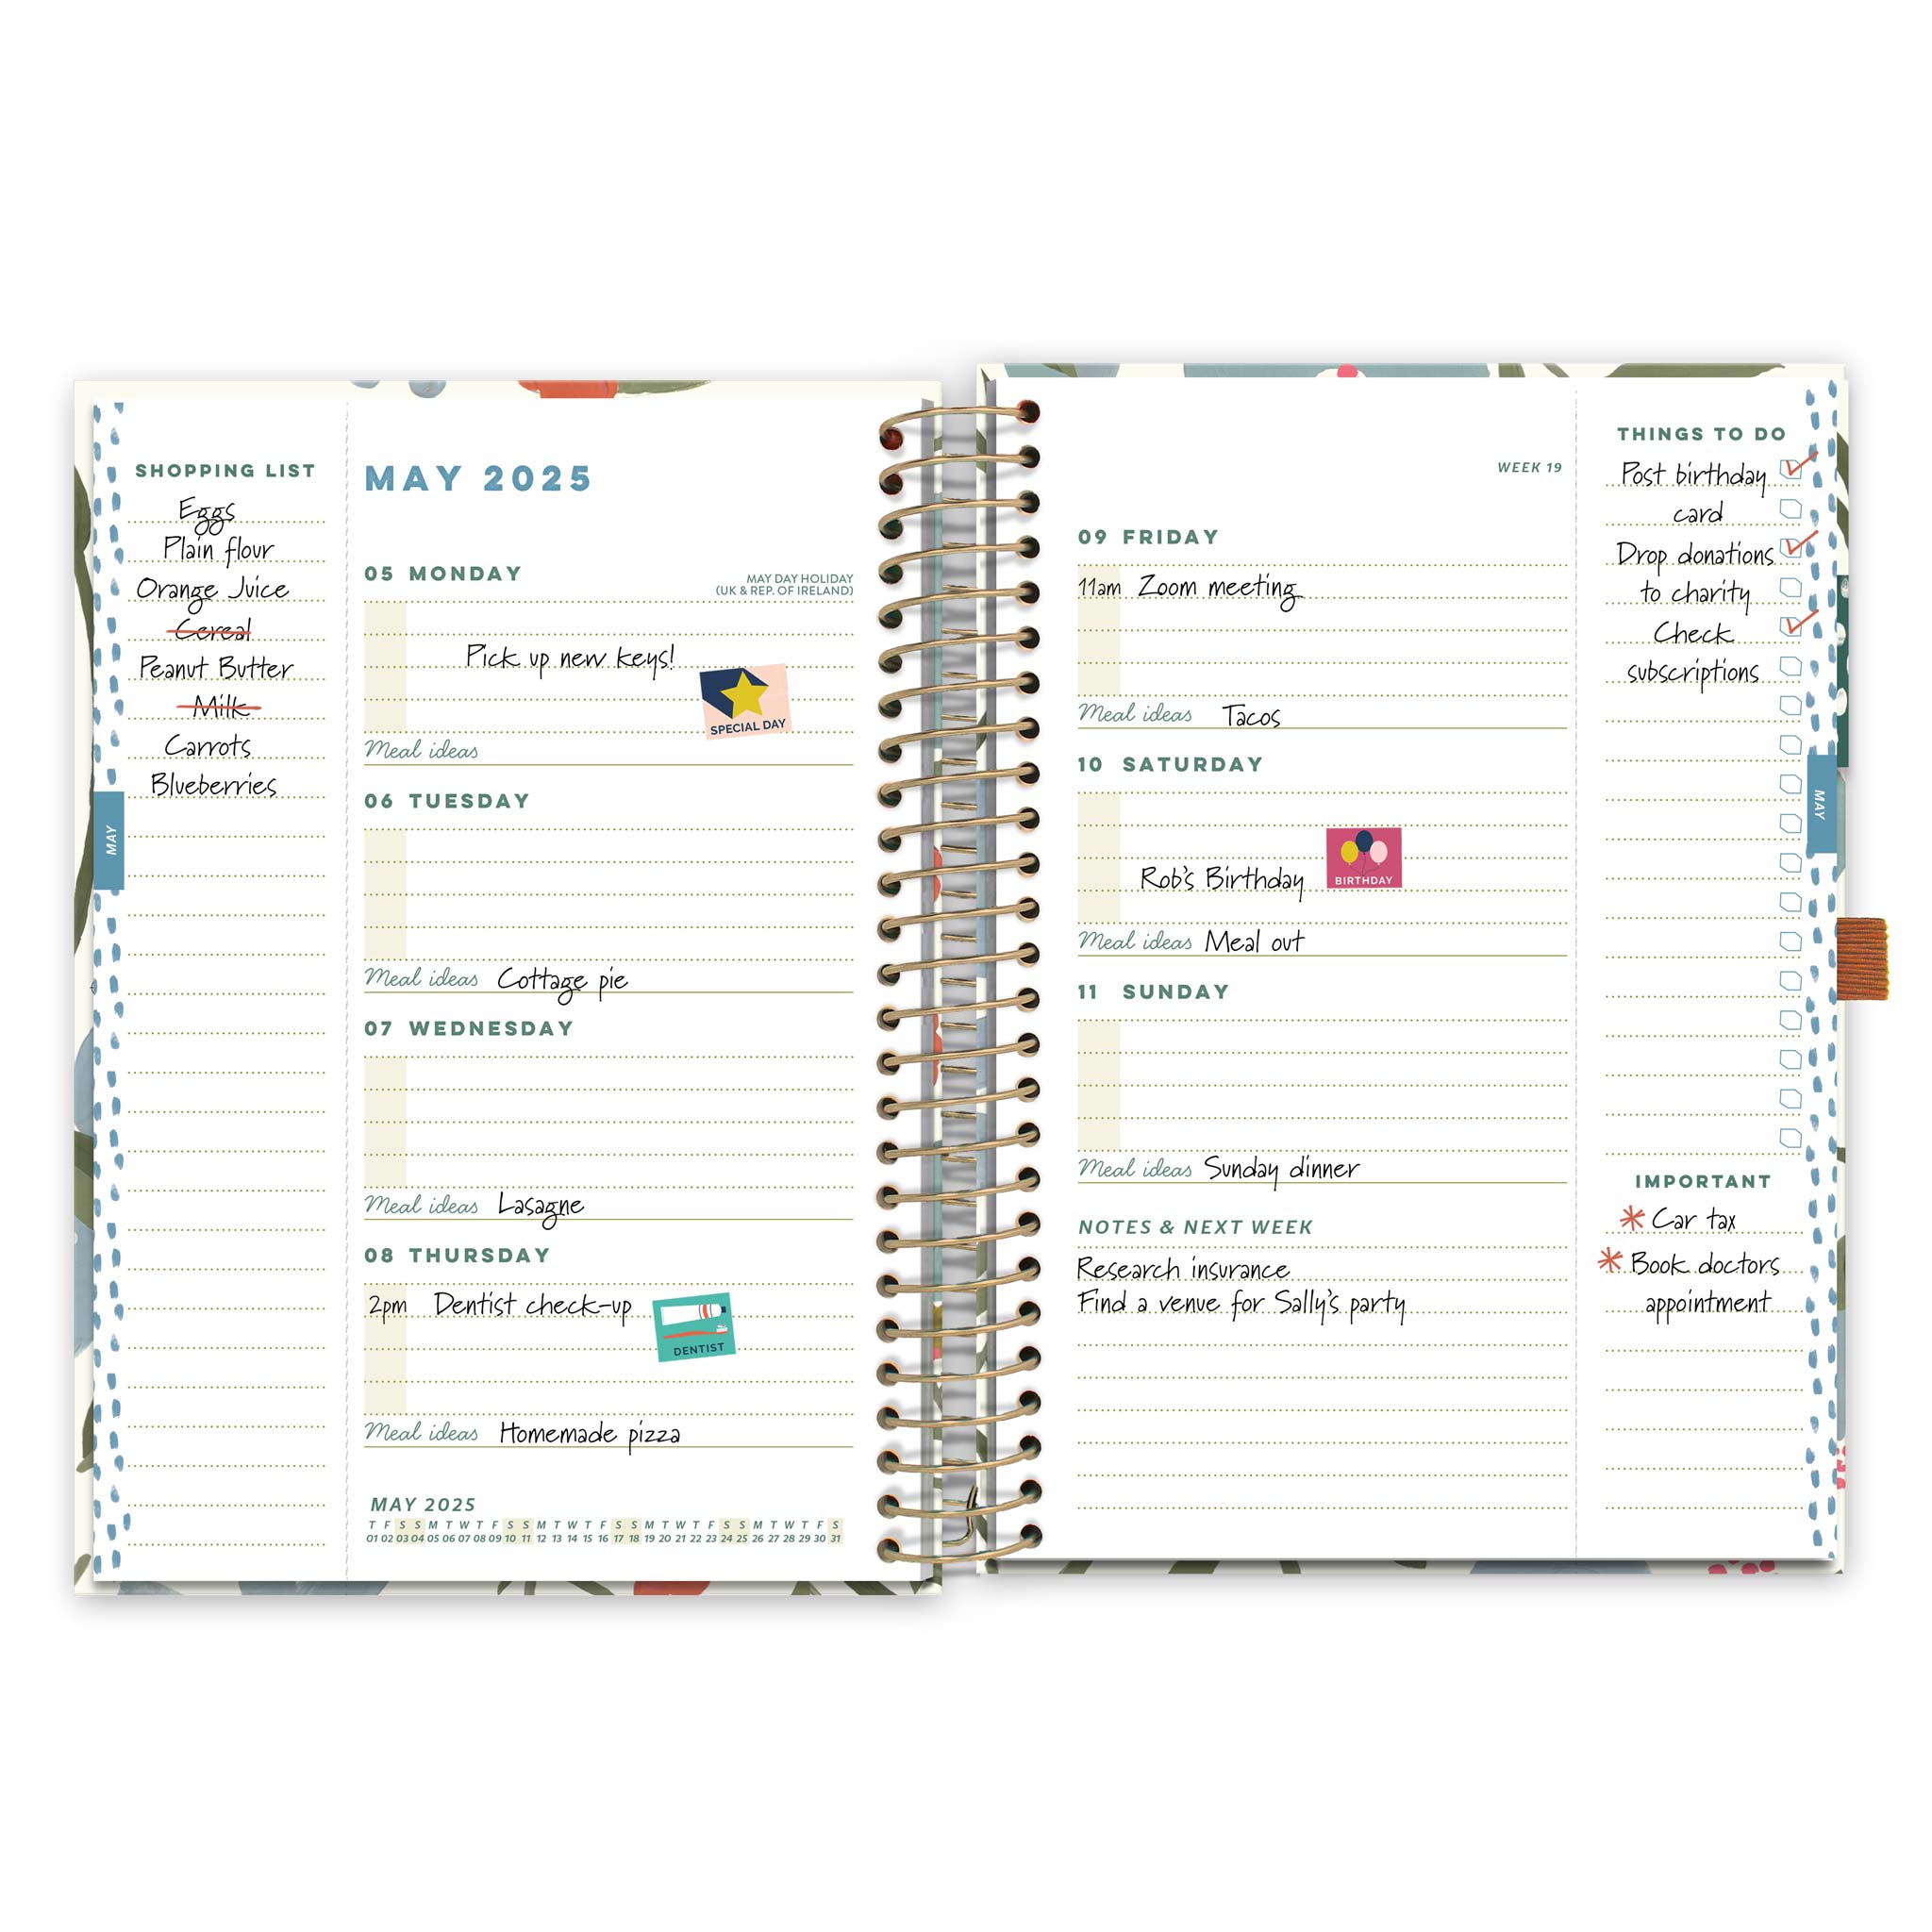 General Calendar and Diary Reminder Stickers